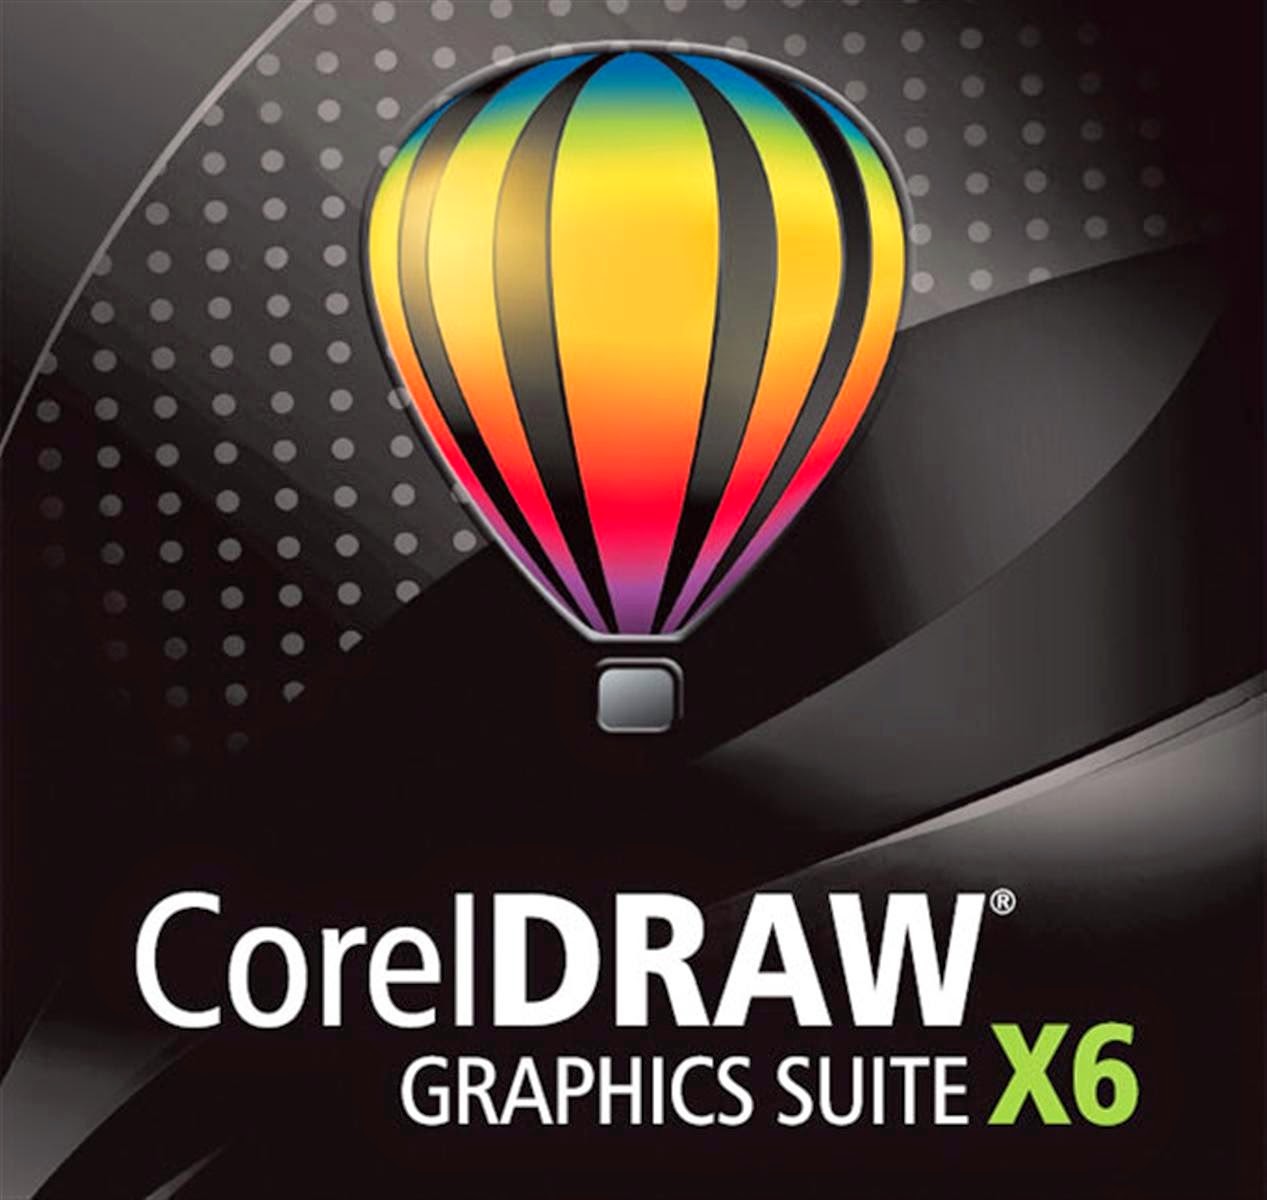 coreldraw x6 free download full version with crack filehippo